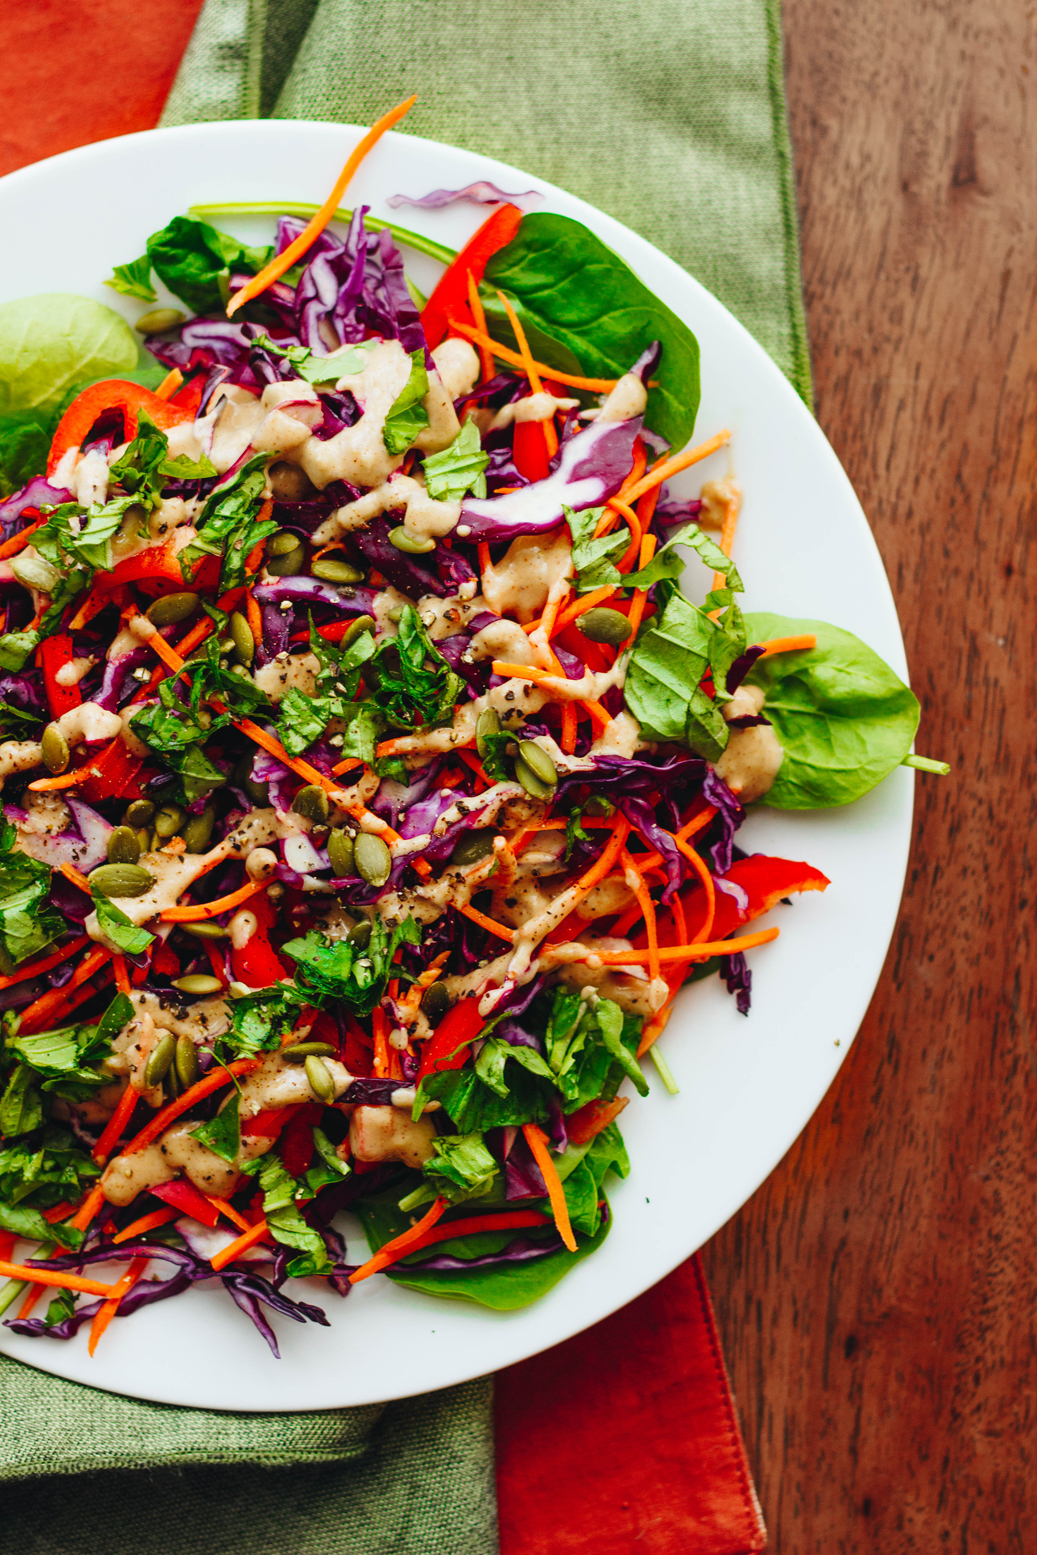 Thai Inspired Salad with Spicy Peanut Dressing